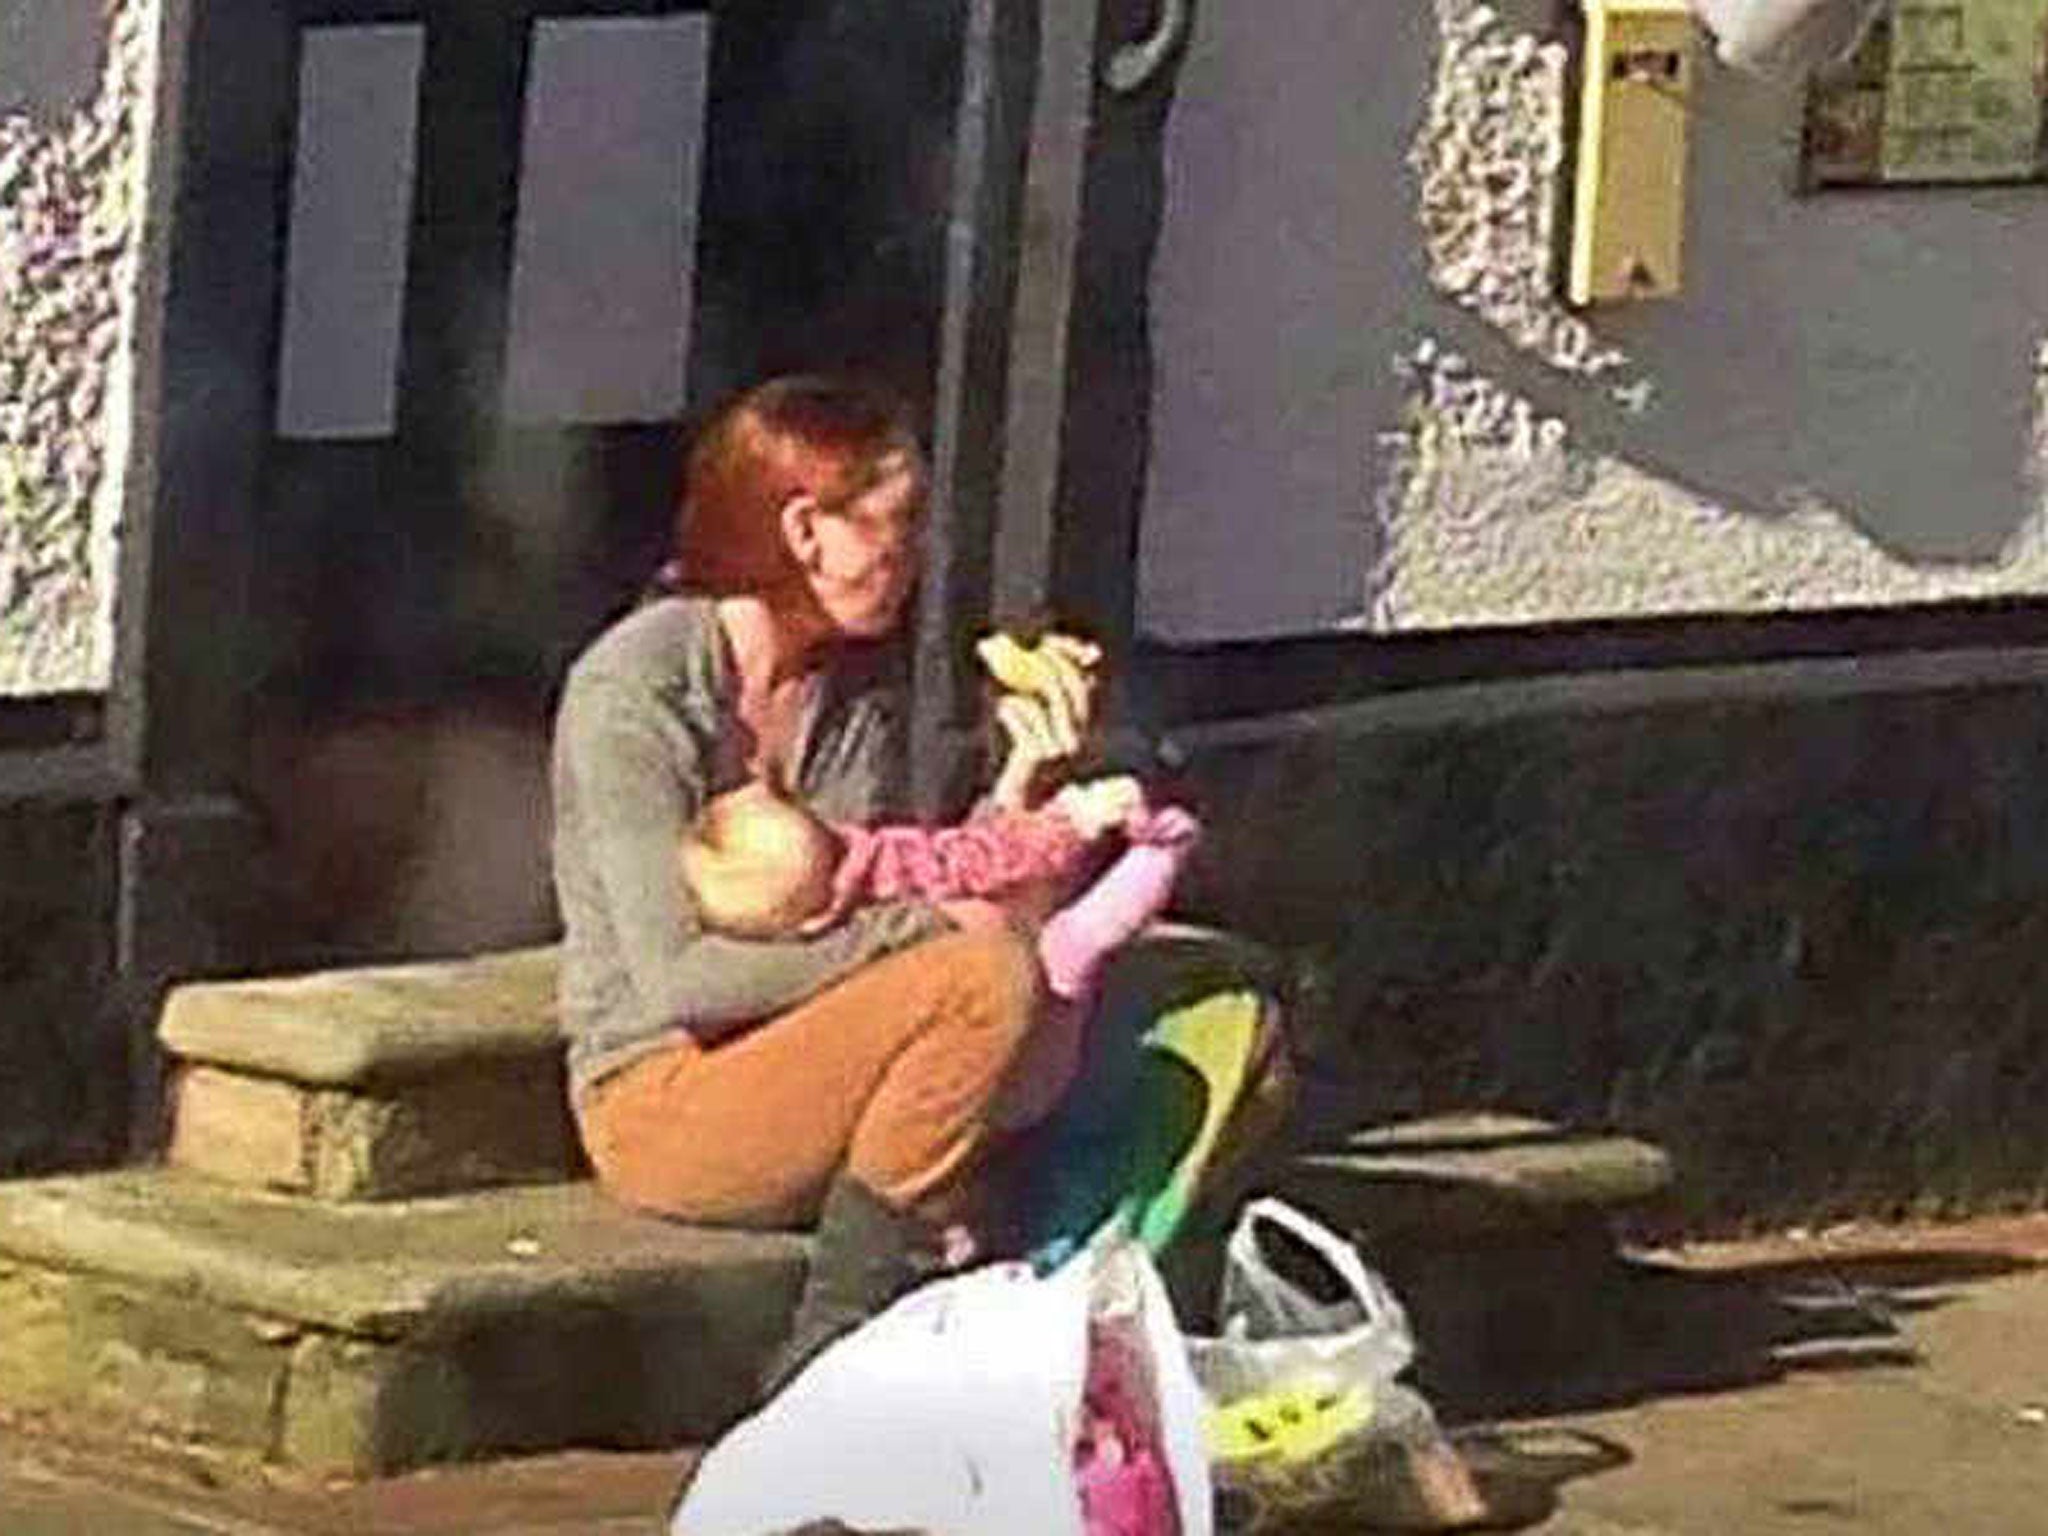 Emily Slough, 27, launched her campaign after a picture of her feeding eight-month-old Matilda was posted on a Facebook page called 'Spotted Rugeley' on Friday